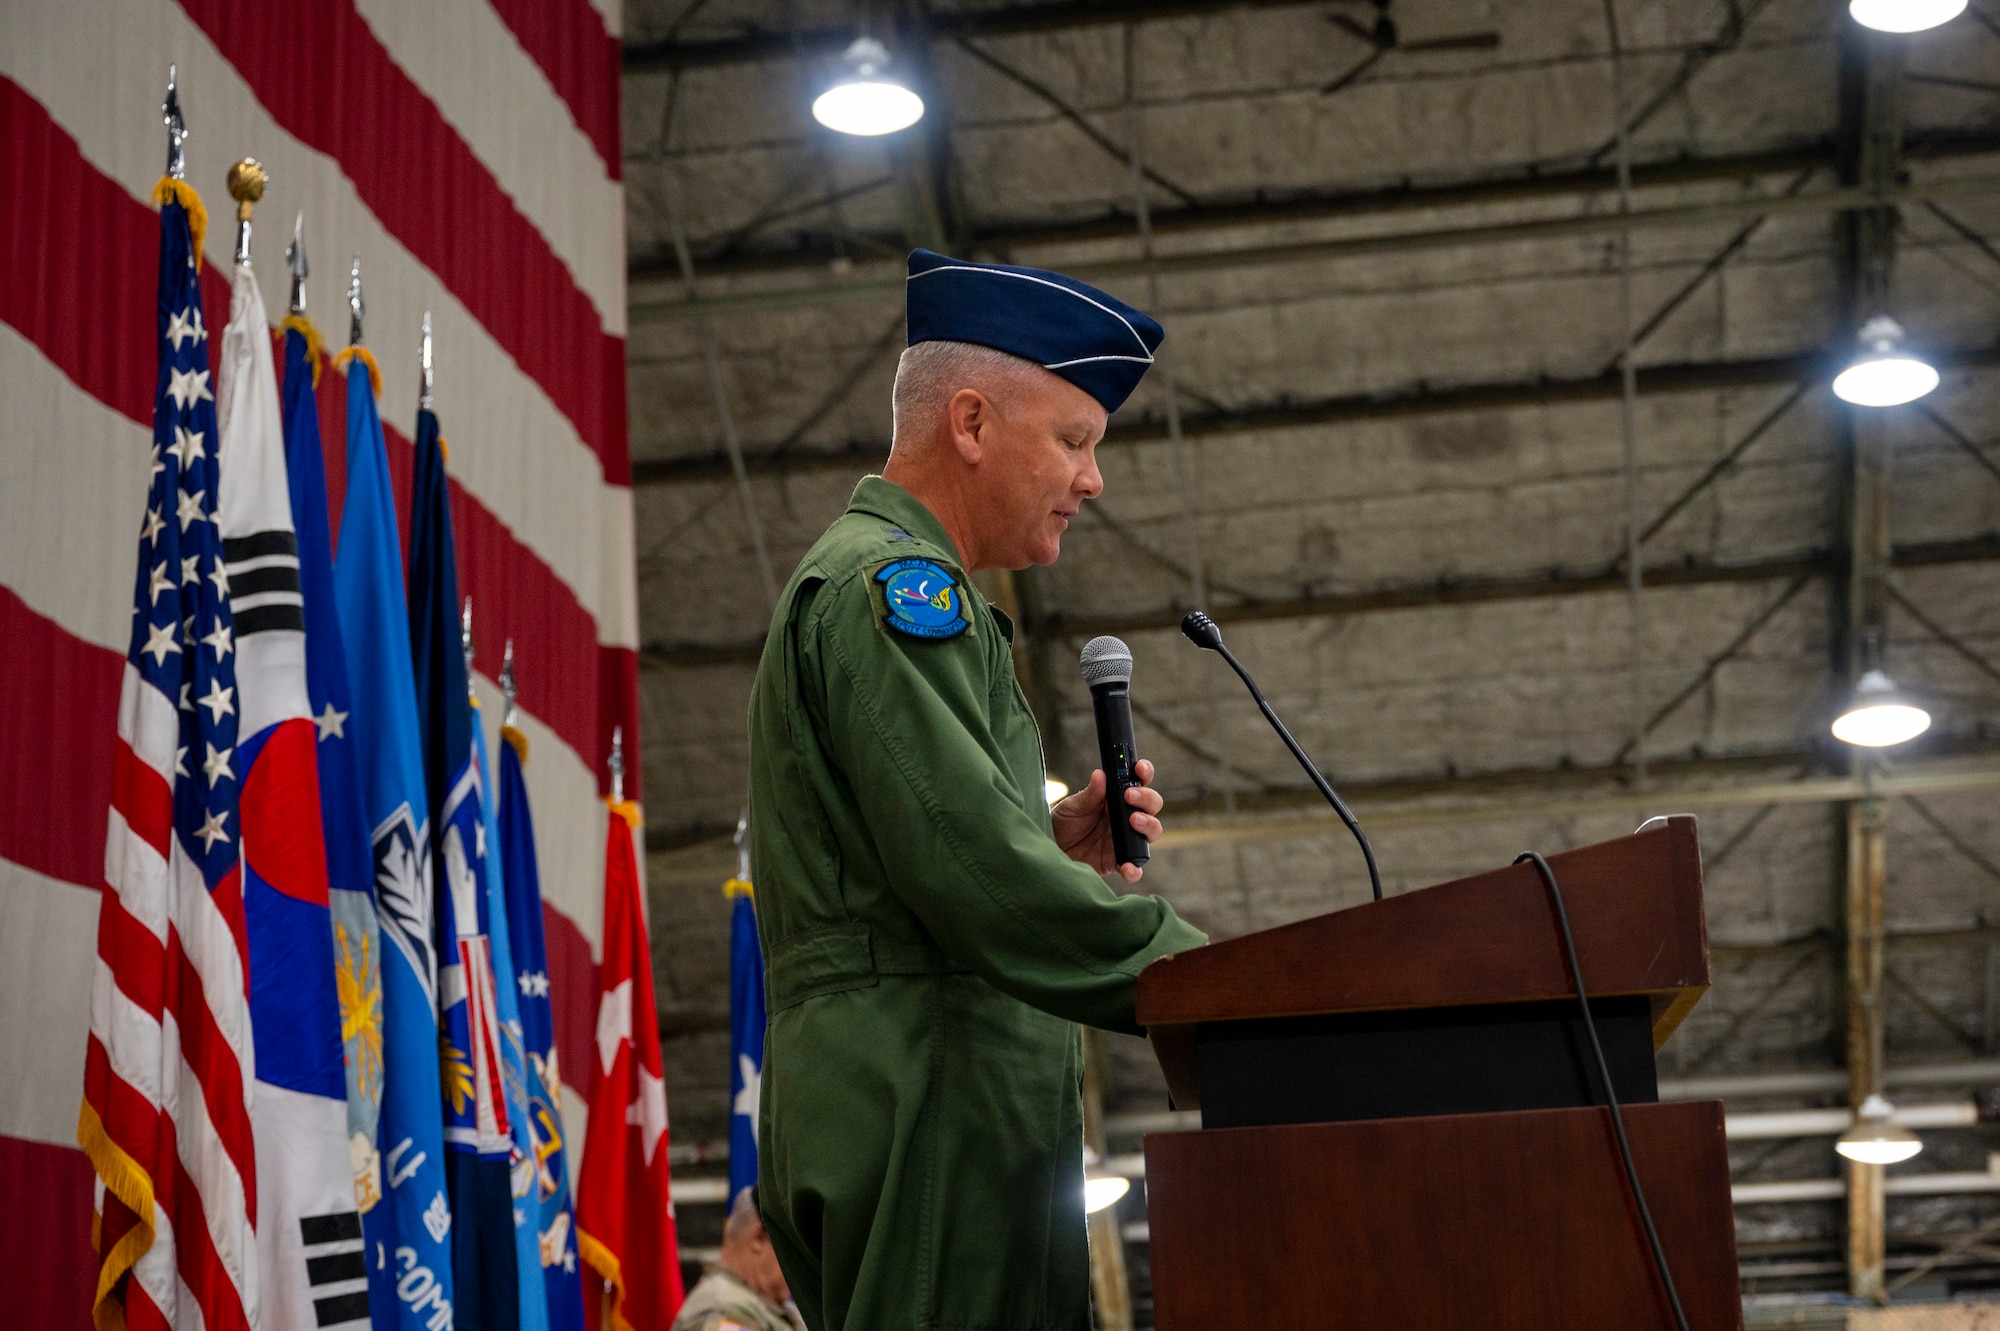 Lt. Gen. James Jacobson, Headquarters Pacific Air Forces deputy commander, holds a microphone from behind a podium while on a stage with a U.S. flag backdrop.